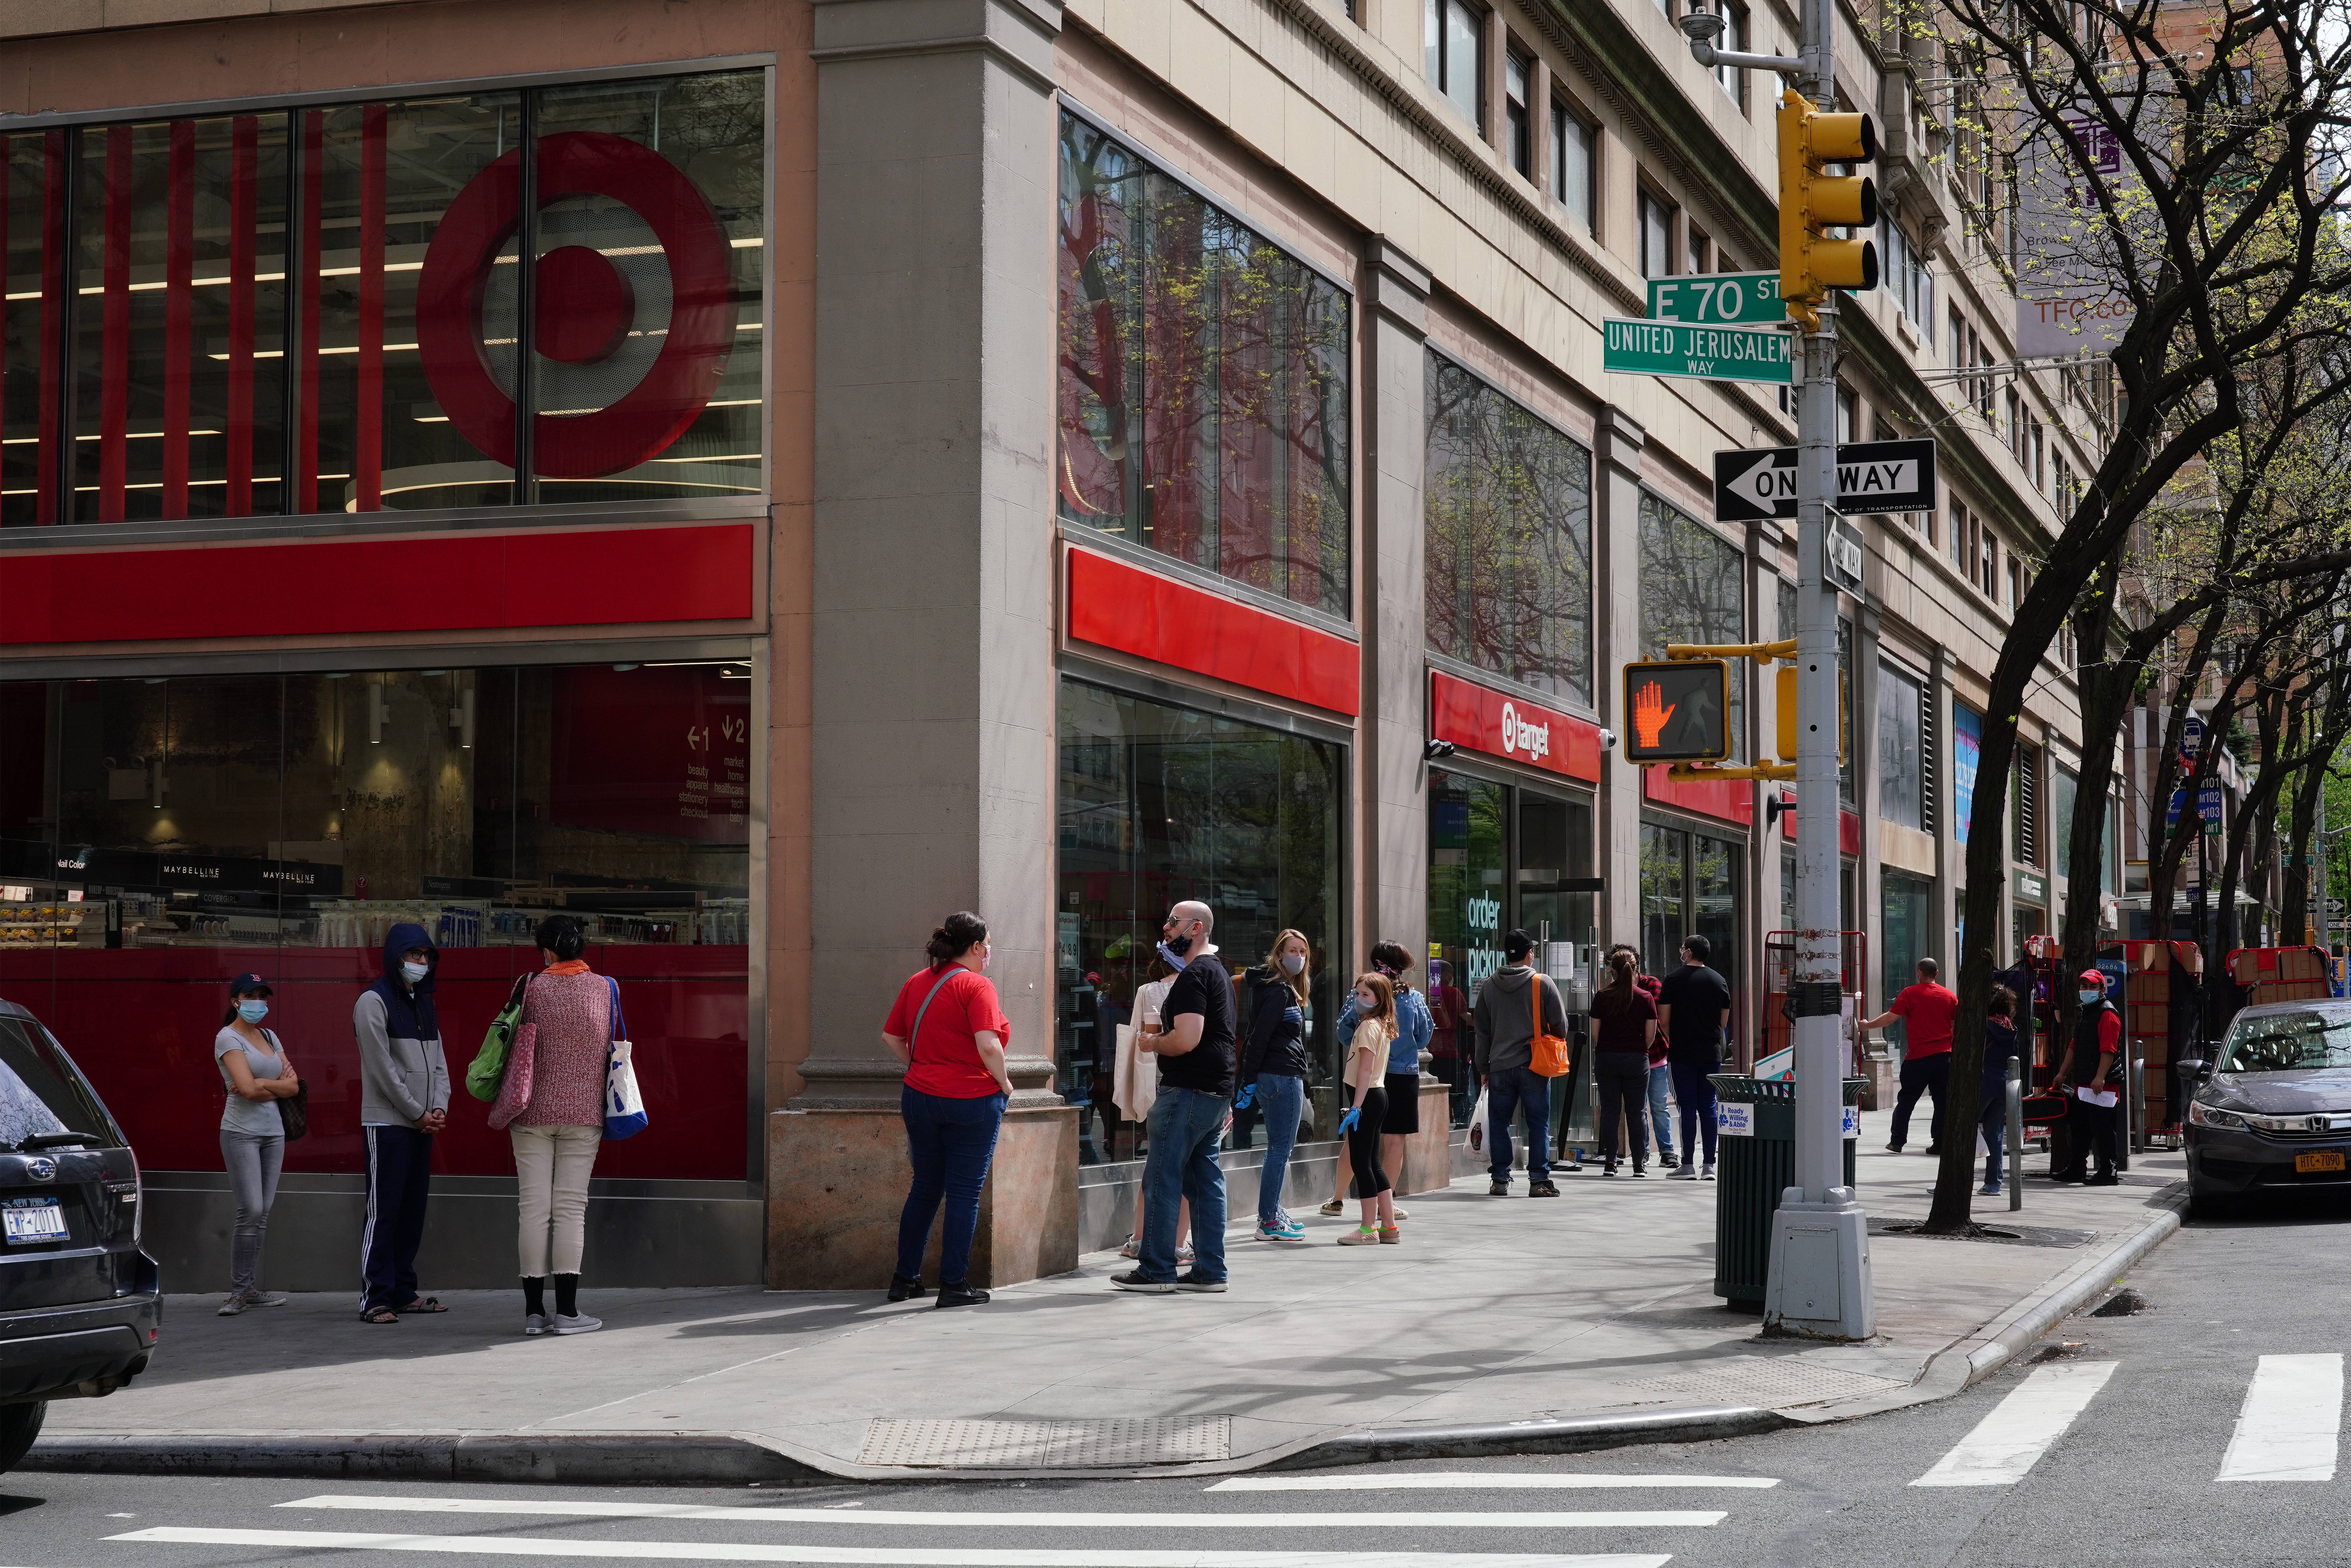 People line up to get into Target during the coronavirus pandemic on May 2, 2020 in New York City. COVID-19 has spread to most countries around the world, claiming over 244,000 lives with over 3.4 million infections reported. (Photo by Cindy Ord/Getty Images)